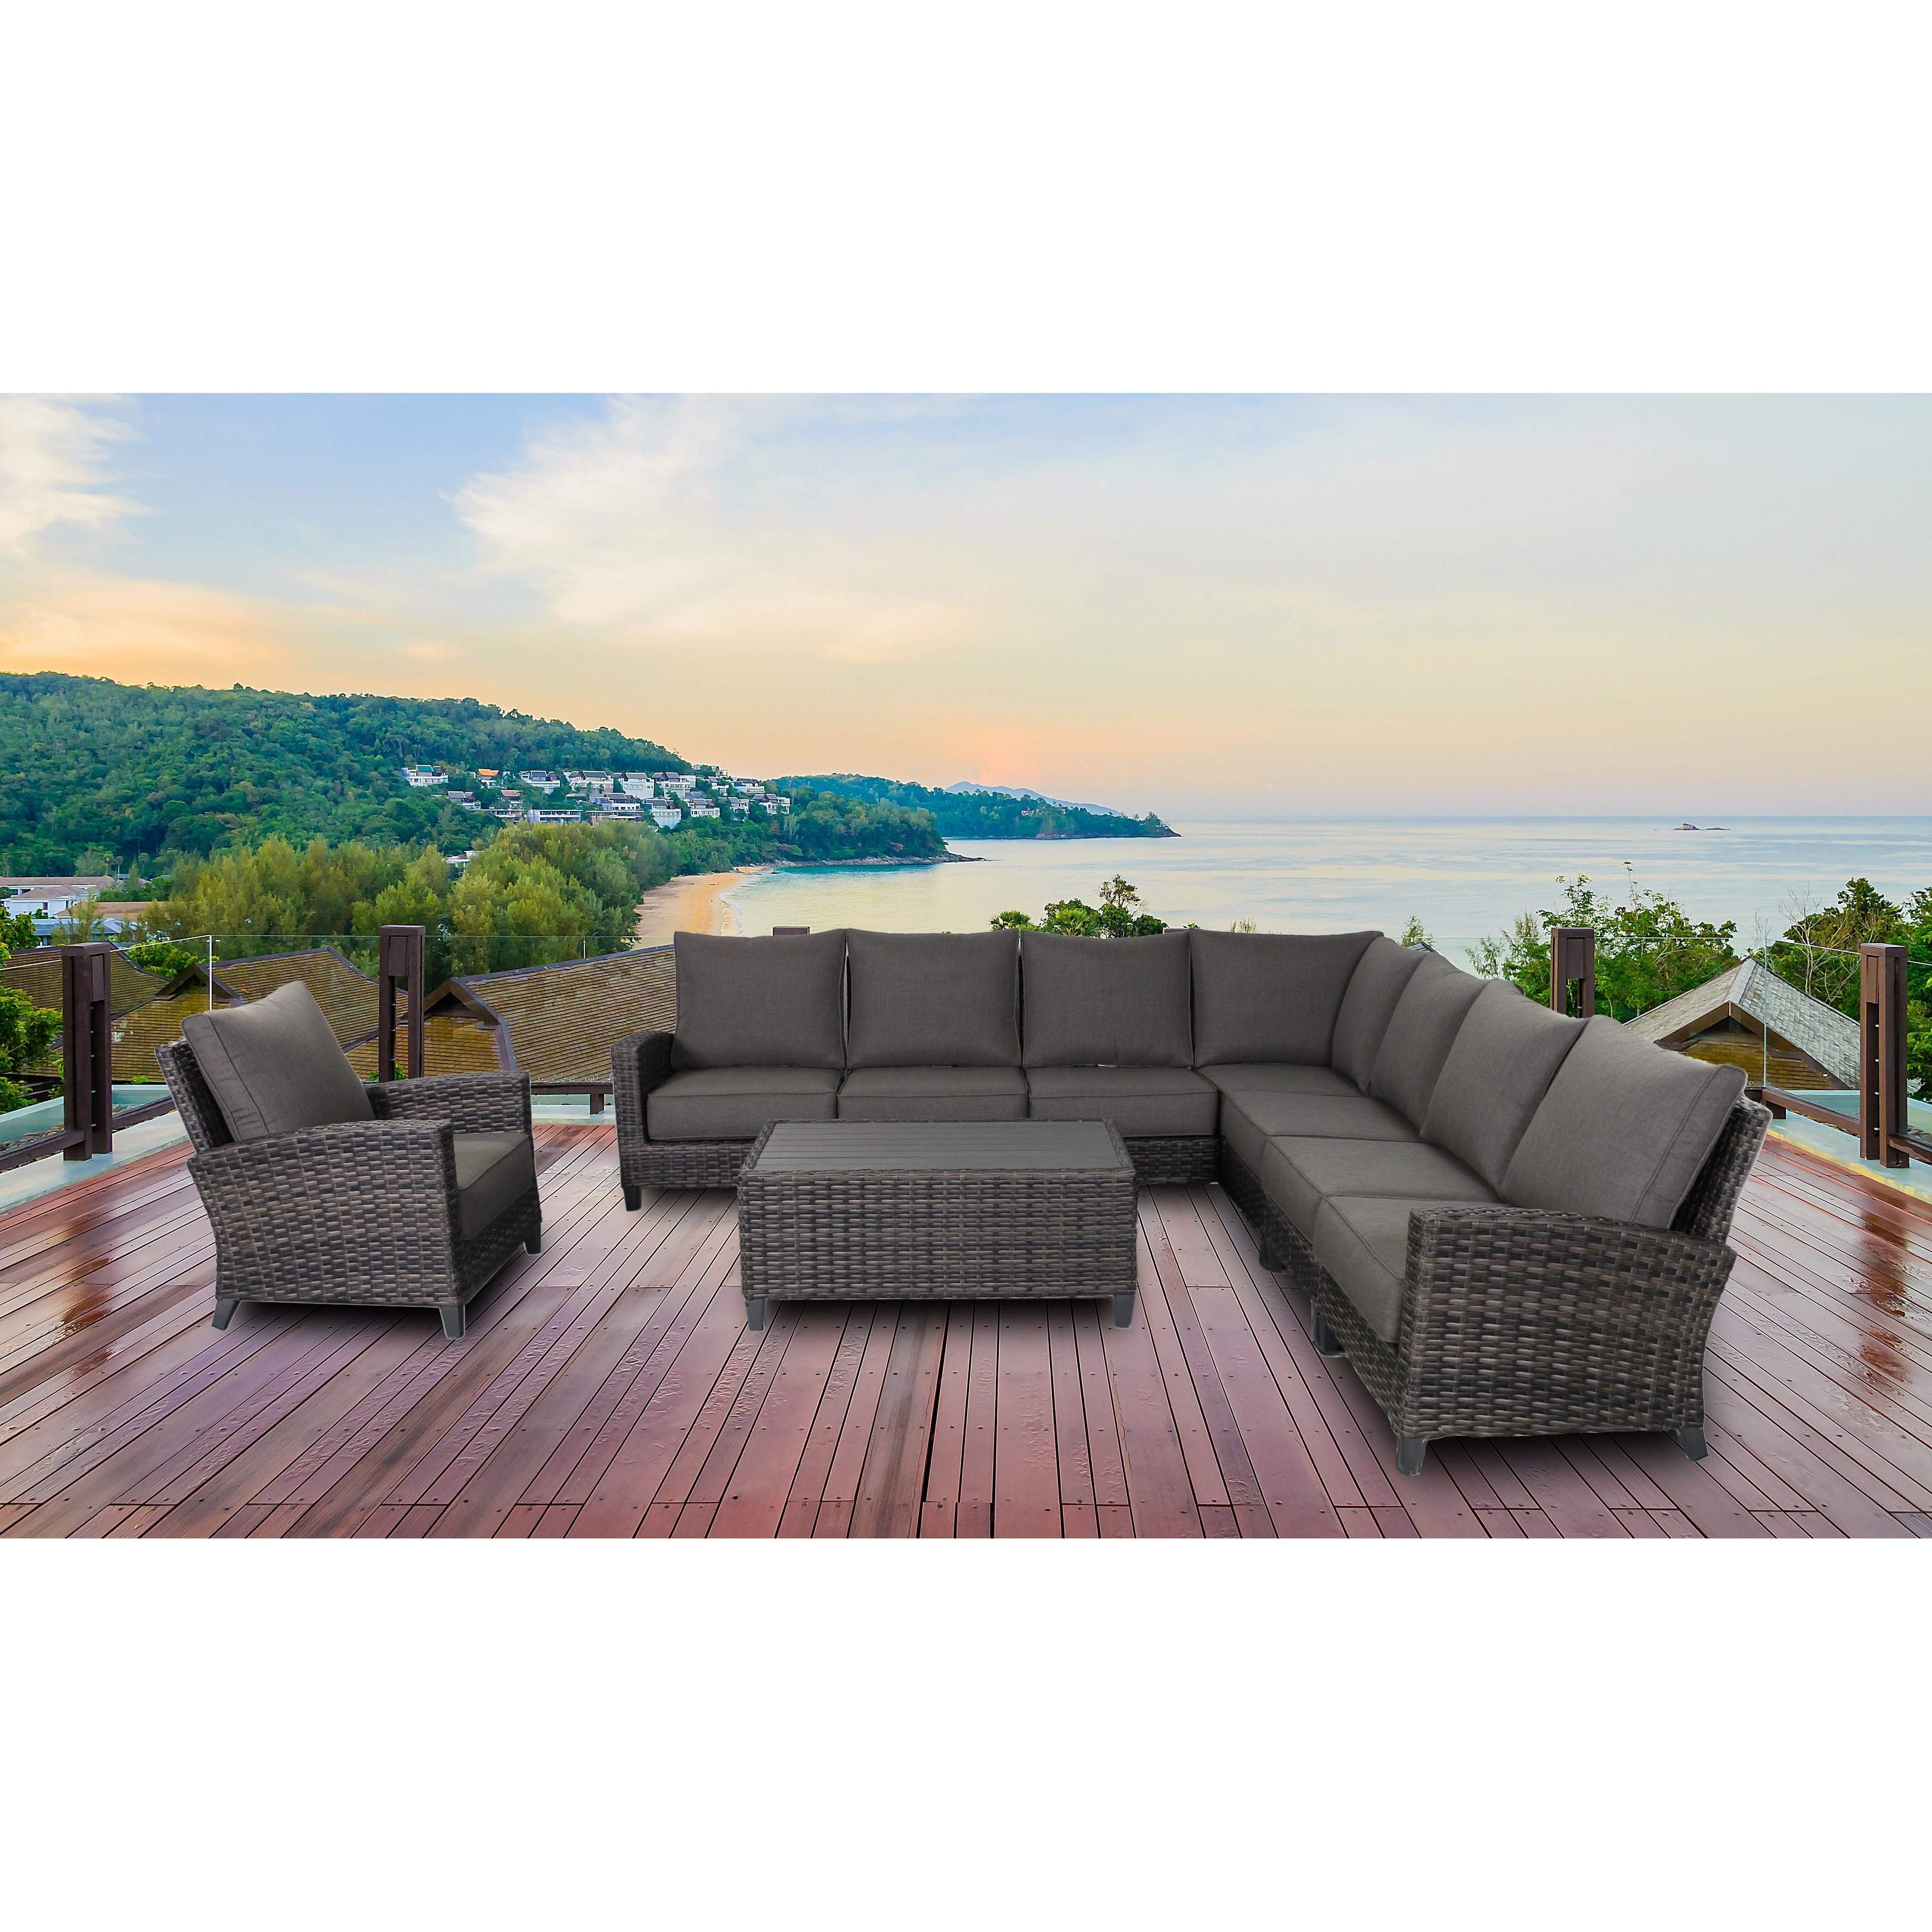 Barbados 7-piece Sectional Set Outdoor Patio Furniture Rattan Wicker Frame Includes Grey Olefin Cushions